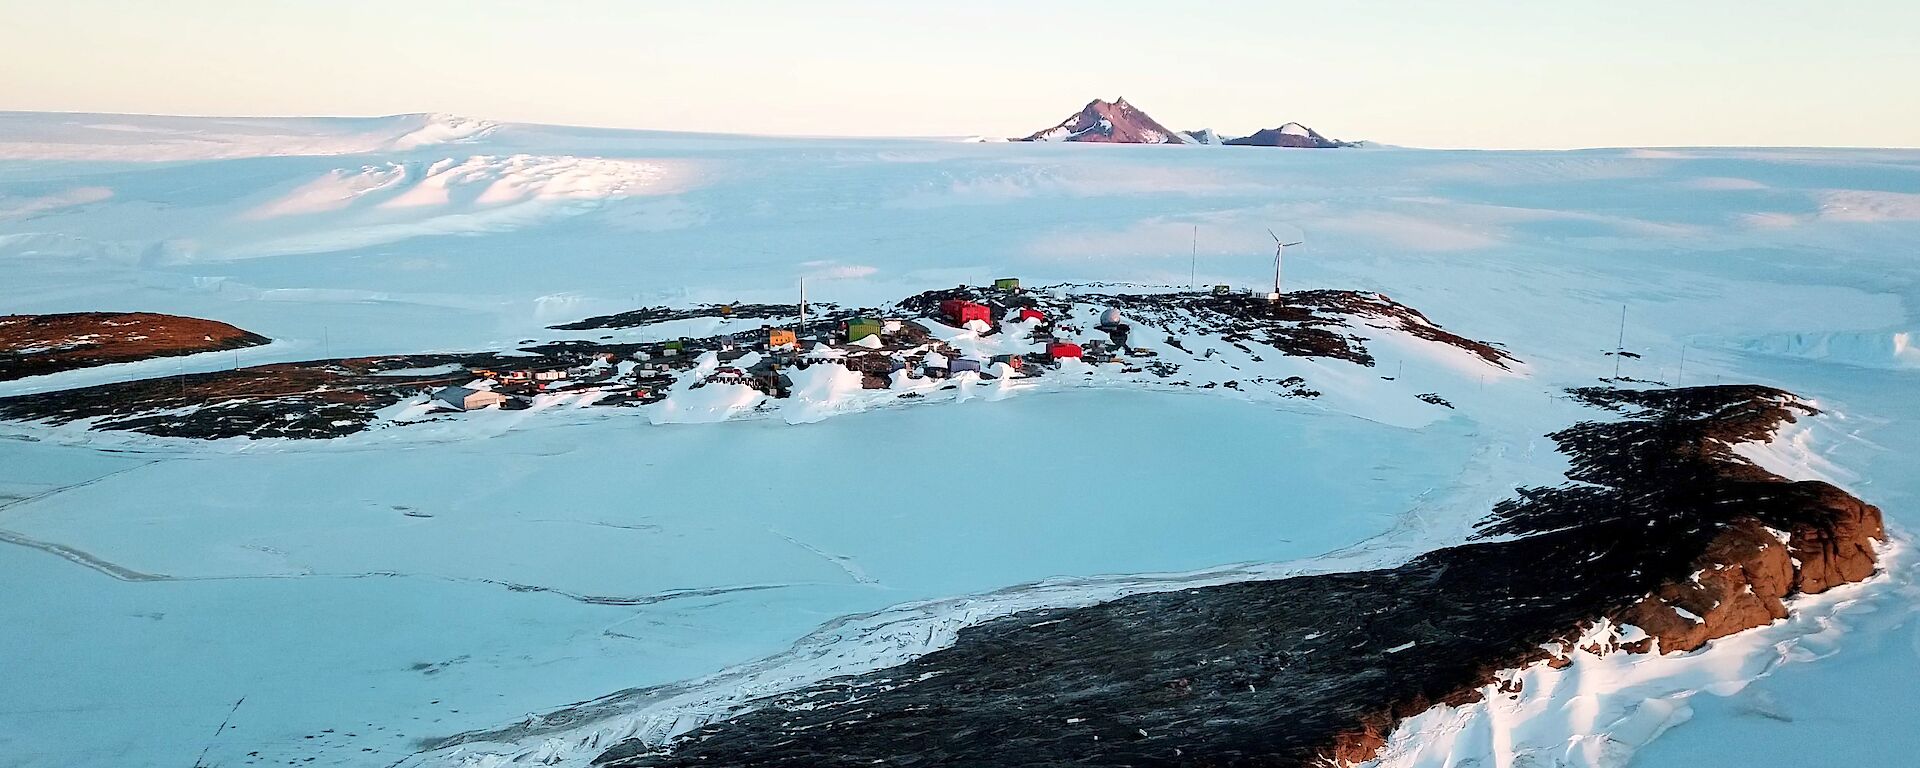 Antarctic research station from the air with mountain in background